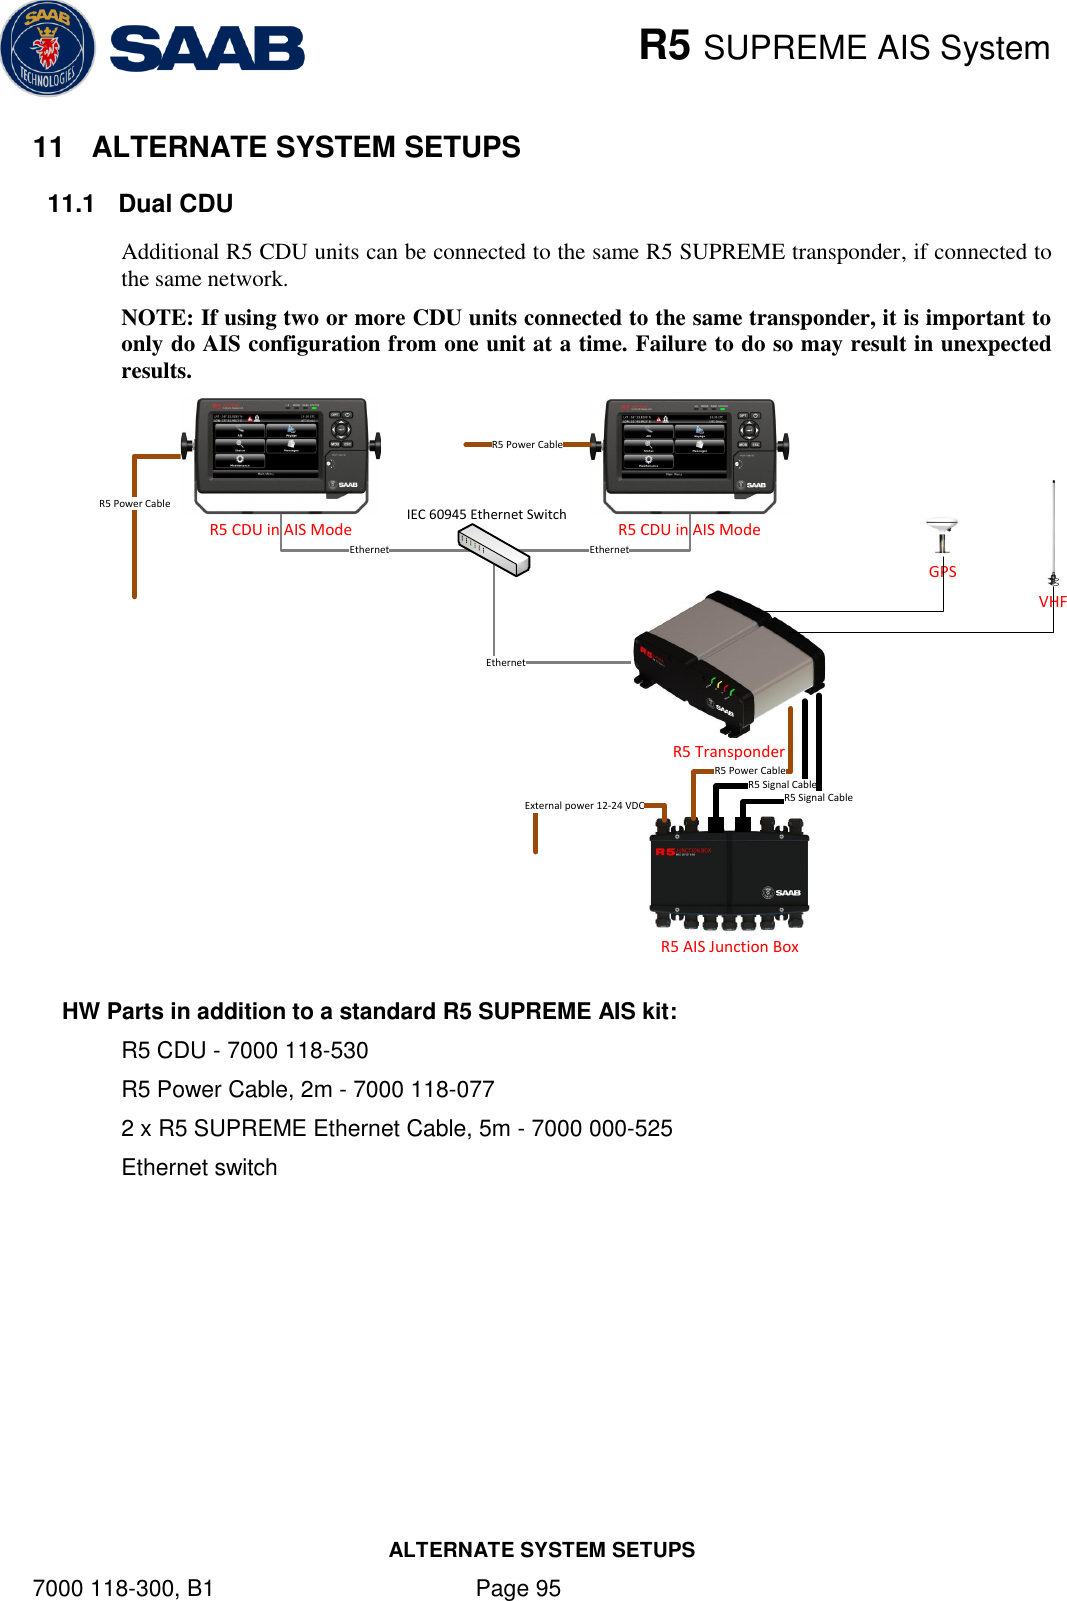    R5 SUPREME AIS System ALTERNATE SYSTEM SETUPS 7000 118-300, B1    Page 95 11  ALTERNATE SYSTEM SETUPS 11.1  Dual CDU Additional R5 CDU units can be connected to the same R5 SUPREME transponder, if connected to the same network.  NOTE: If using two or more CDU units connected to the same transponder, it is important to only do AIS configuration from one unit at a time. Failure to do so may result in unexpected results.  R5 AIS Junction BoxEthernetExternal power 12-24 VDCR5 Transponder                  R5 Signal CableR5 Signal CableR5 Power CableR5 CDU in AIS ModeR5 Power CableVHFGPSR5 CDU in AIS ModeEthernetEthernetIEC 60945 Ethernet SwitchR5 Power Cable HW Parts in addition to a standard R5 SUPREME AIS kit: R5 CDU - 7000 118-530 R5 Power Cable, 2m - 7000 118-077 2 x R5 SUPREME Ethernet Cable, 5m - 7000 000-525 Ethernet switch   